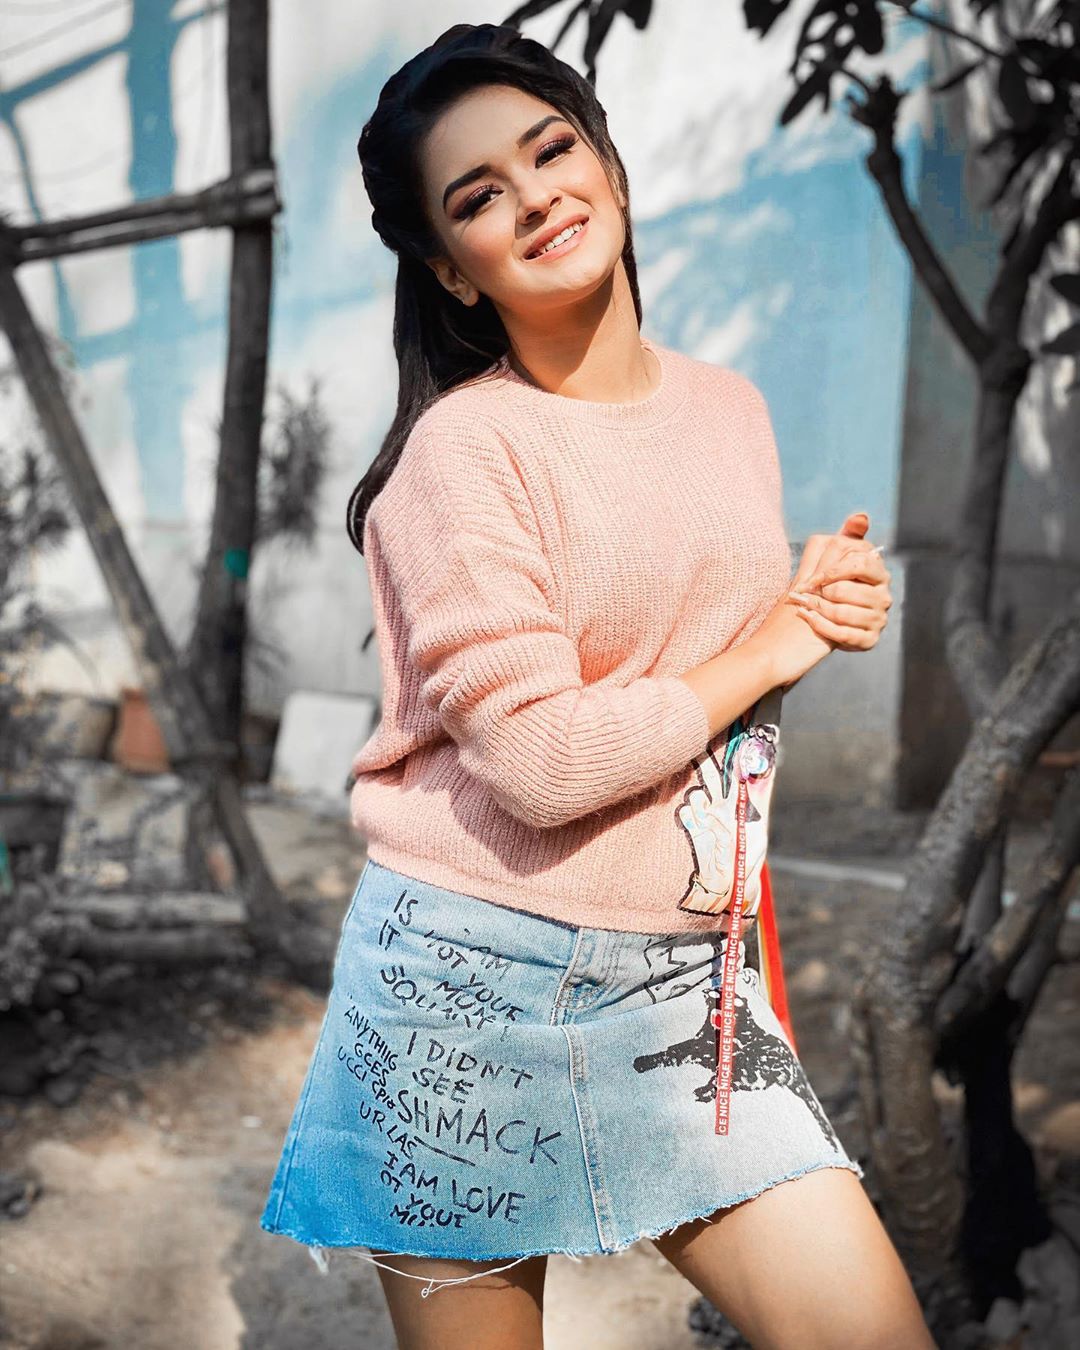 Avneet Kaur Wallpapers, Photos, Images & Pictures Hello December!
You’re the last one so be the best one
What are you doing this Christmas???
Wearing-